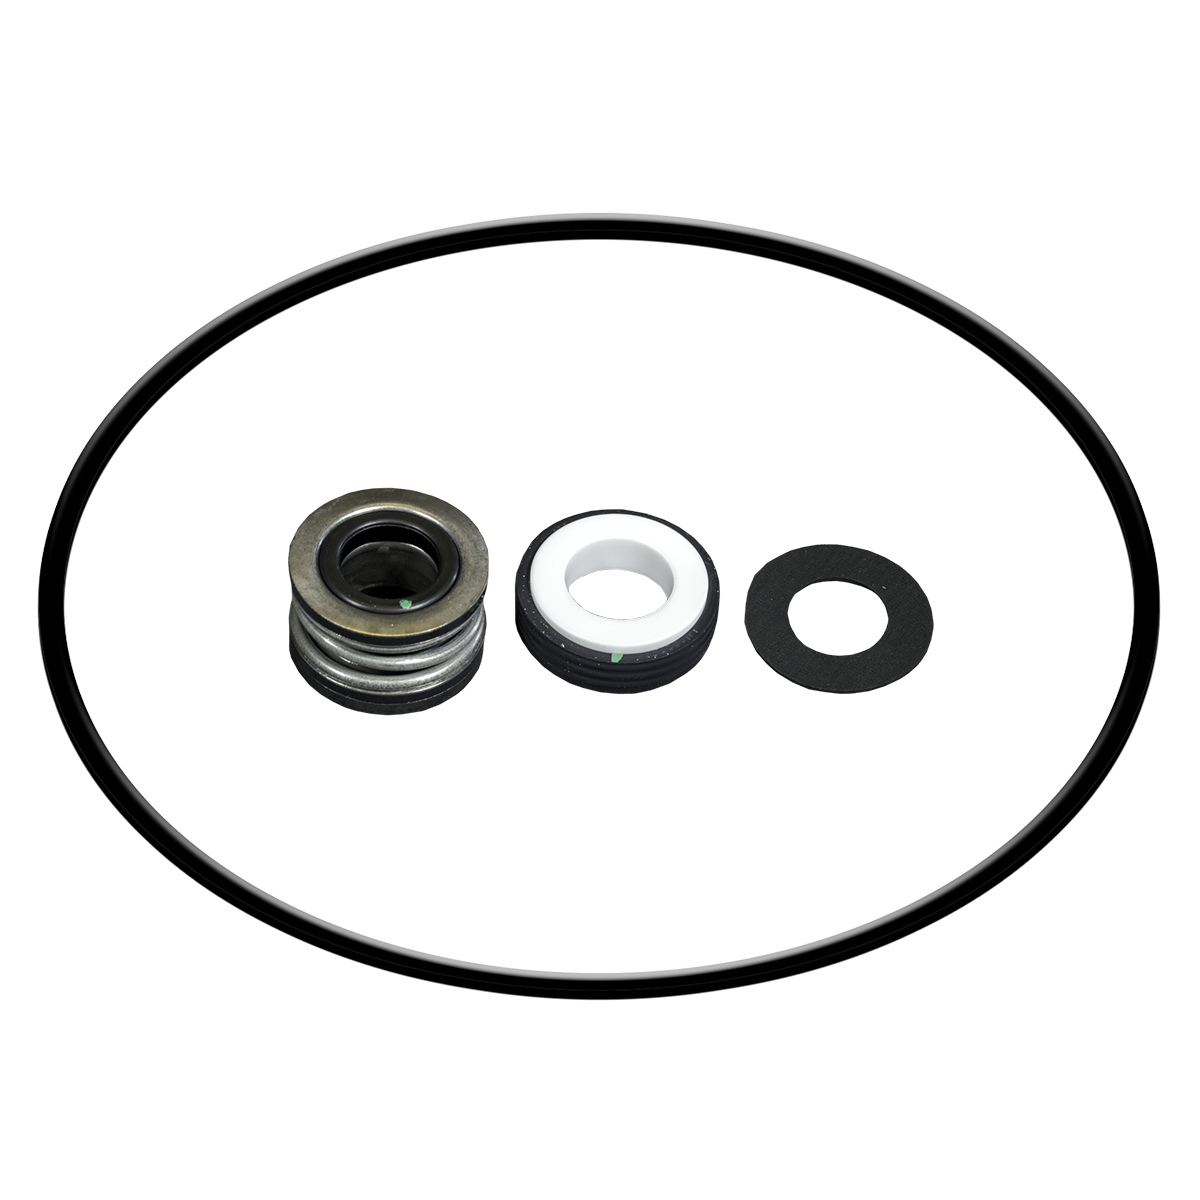 3430-0332 Seal & O-Ring Repair Kit Hypro Cast Iron Centrifugal Pumps